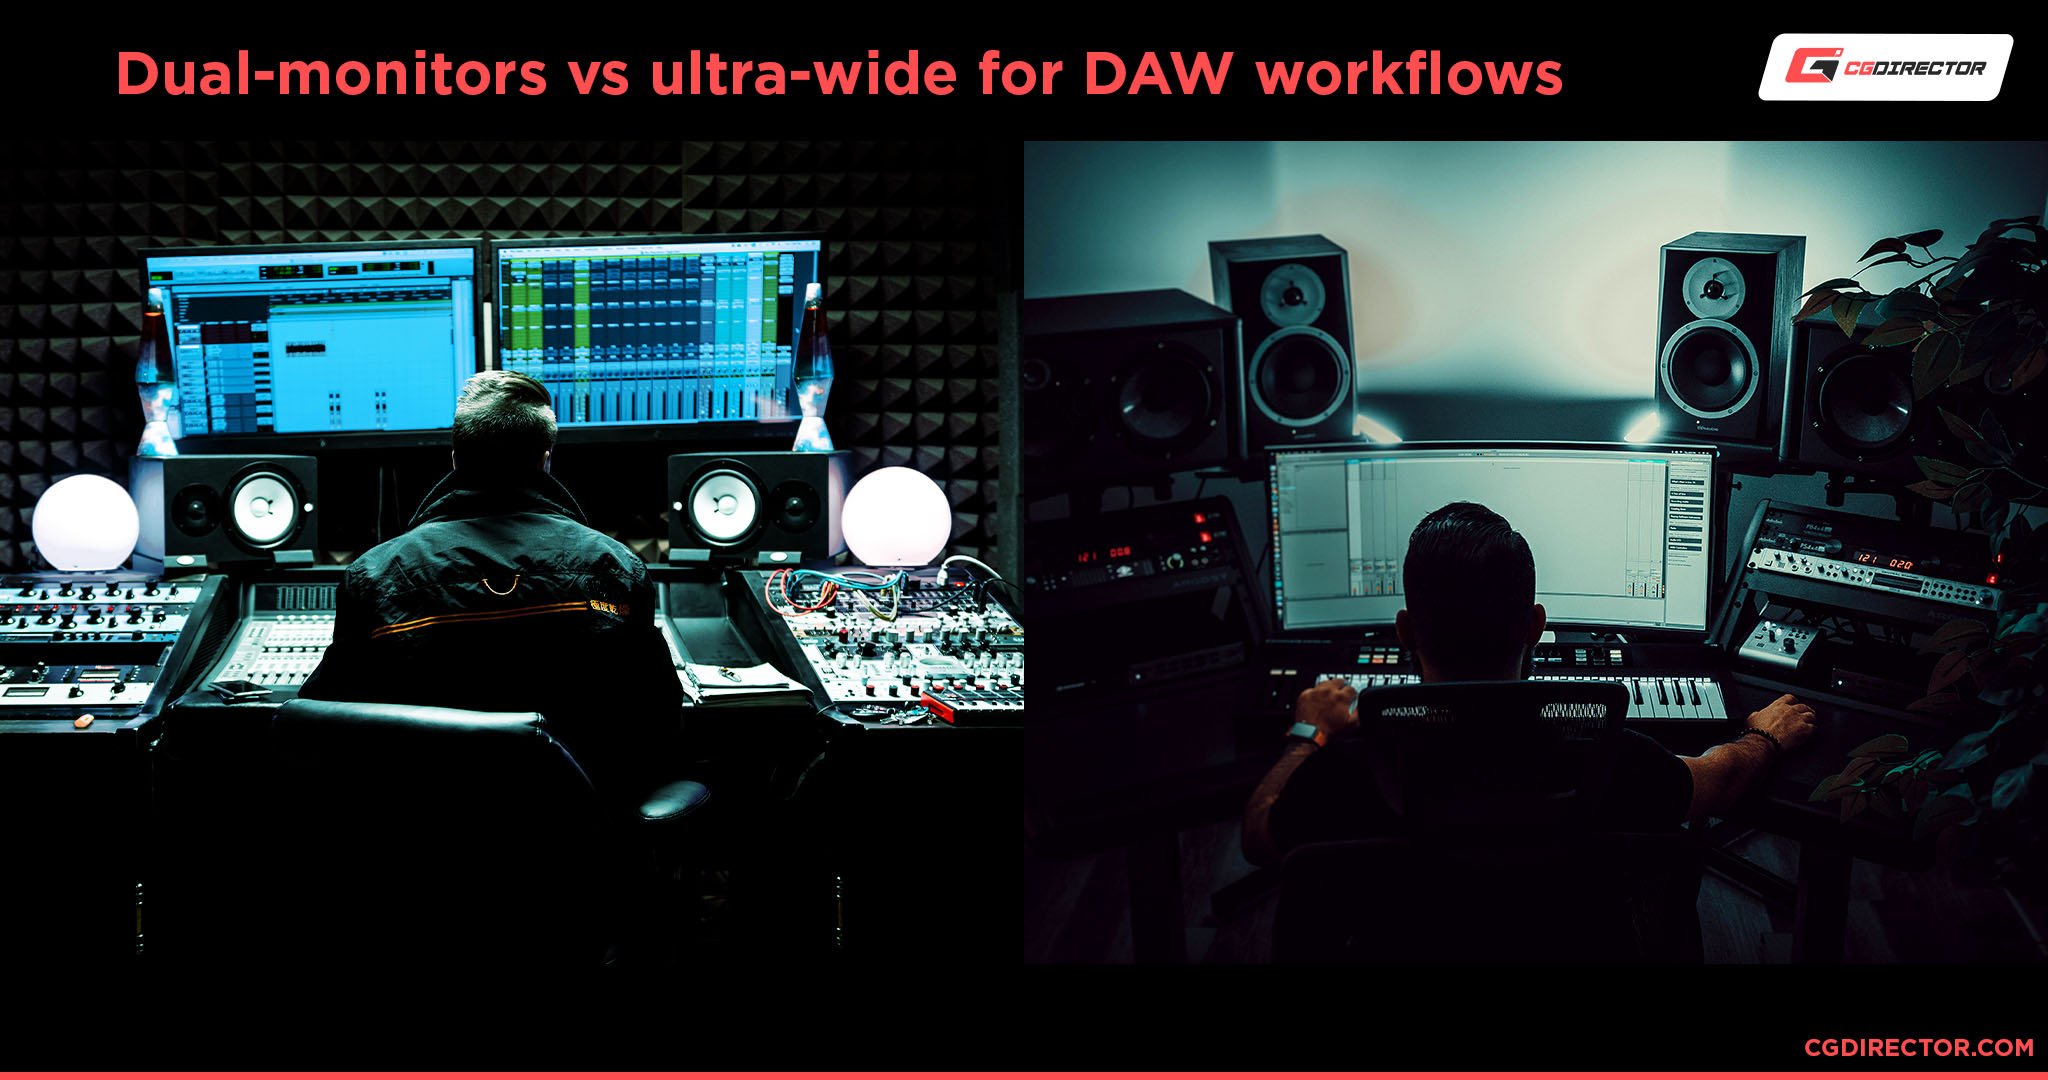 Dual-monitors vs ultra-wide for DAW workflows